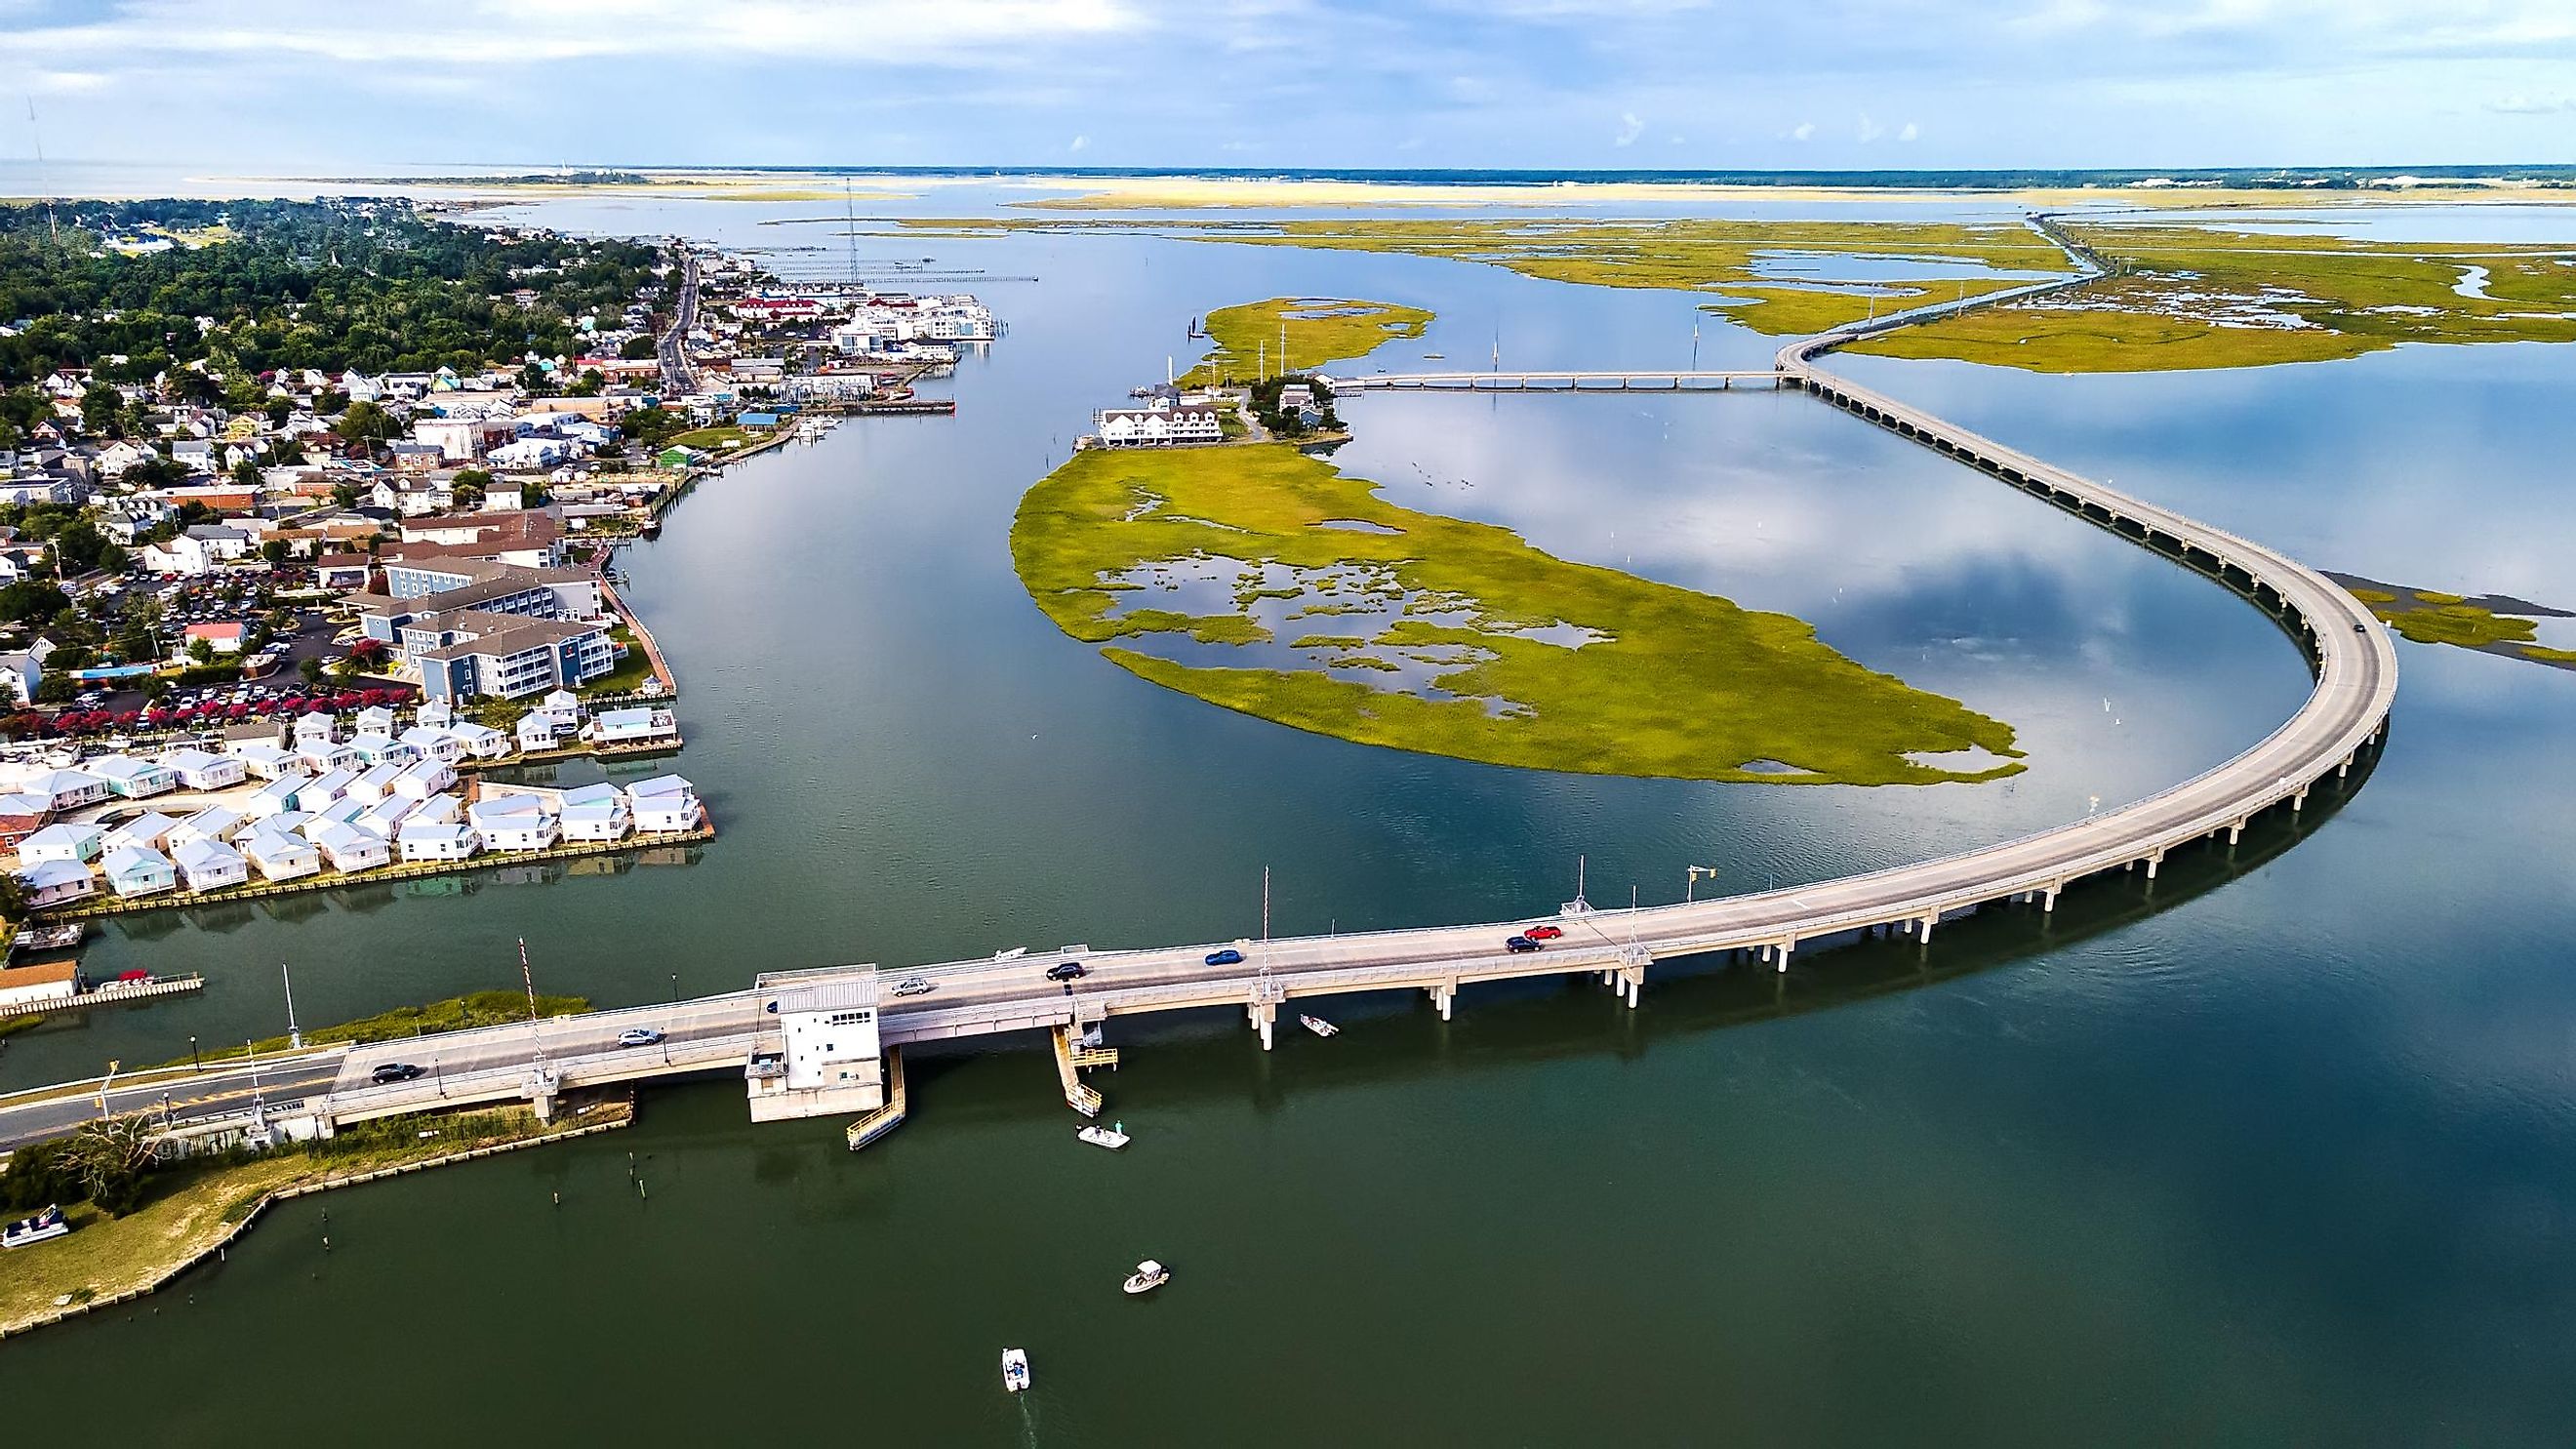 Aerial view of the Long Bridge to Chincoteague Island in Virginia. Reserve with a wide variety of birds and wild horses.